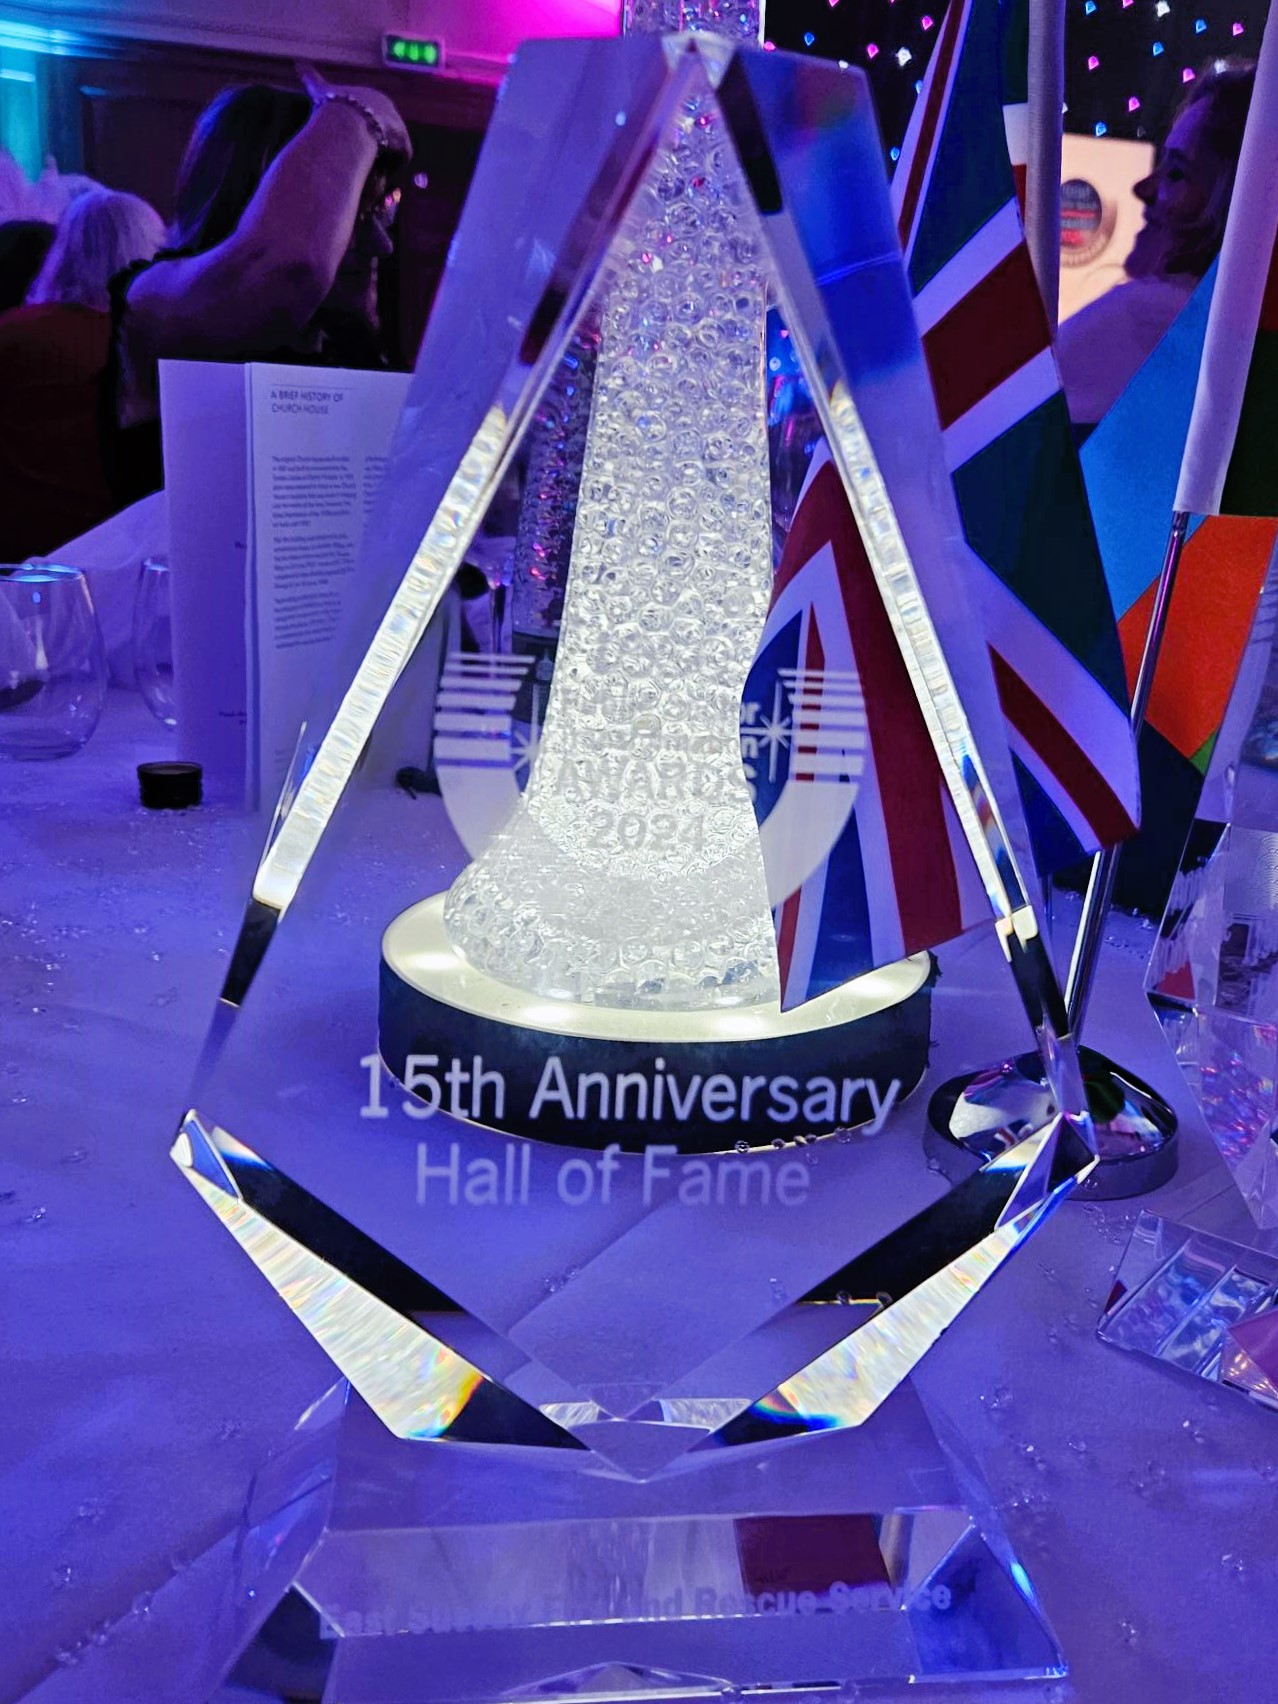 iese glass award with 15th anniversary hall of fame etching